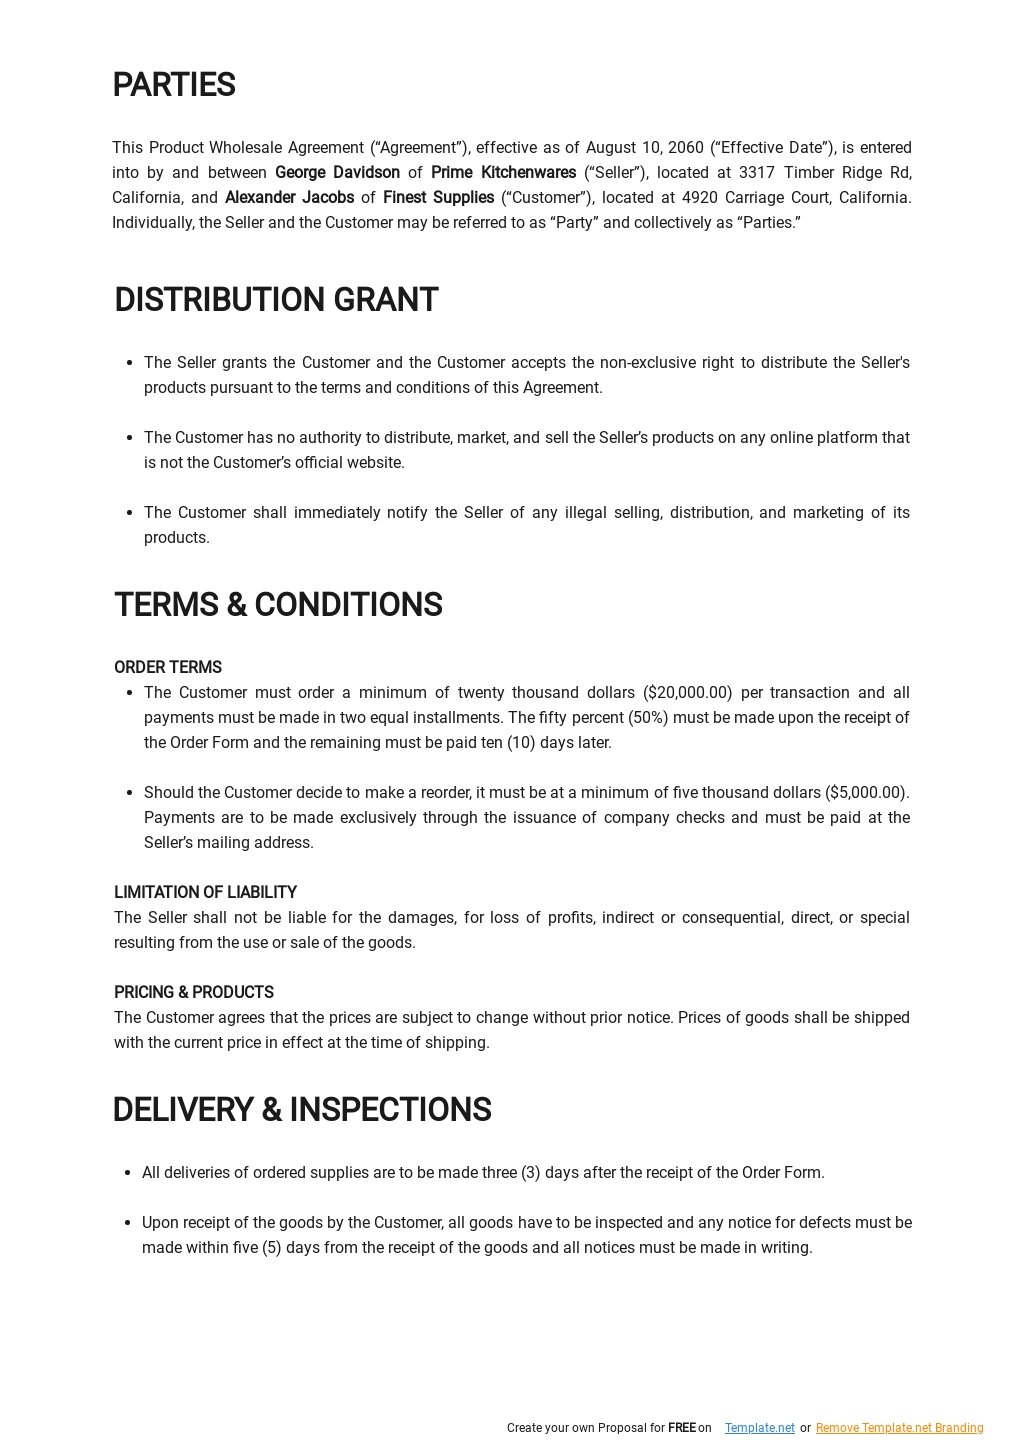 Product Wholesale Agreement Template [Free PDF] Google Docs, Word